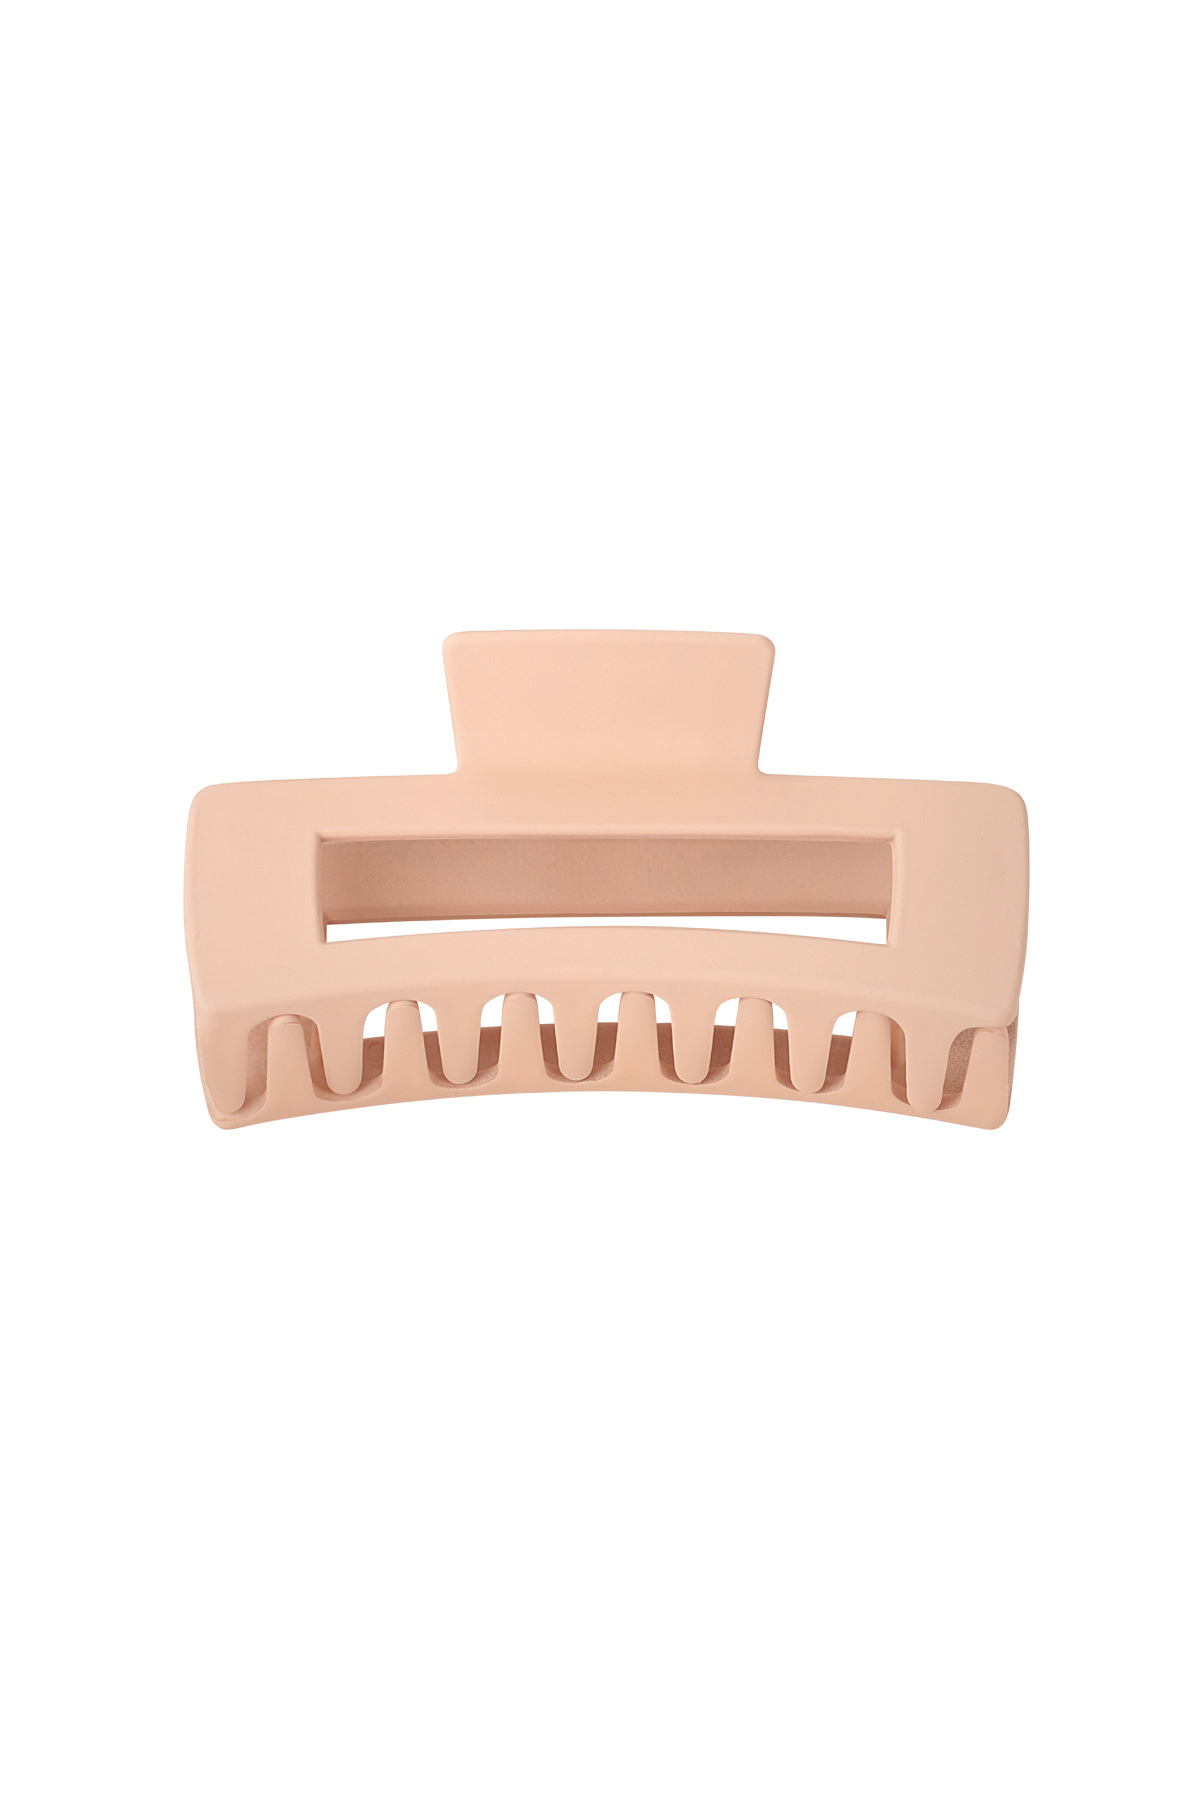 Hair clip rectangle - pink Plastic